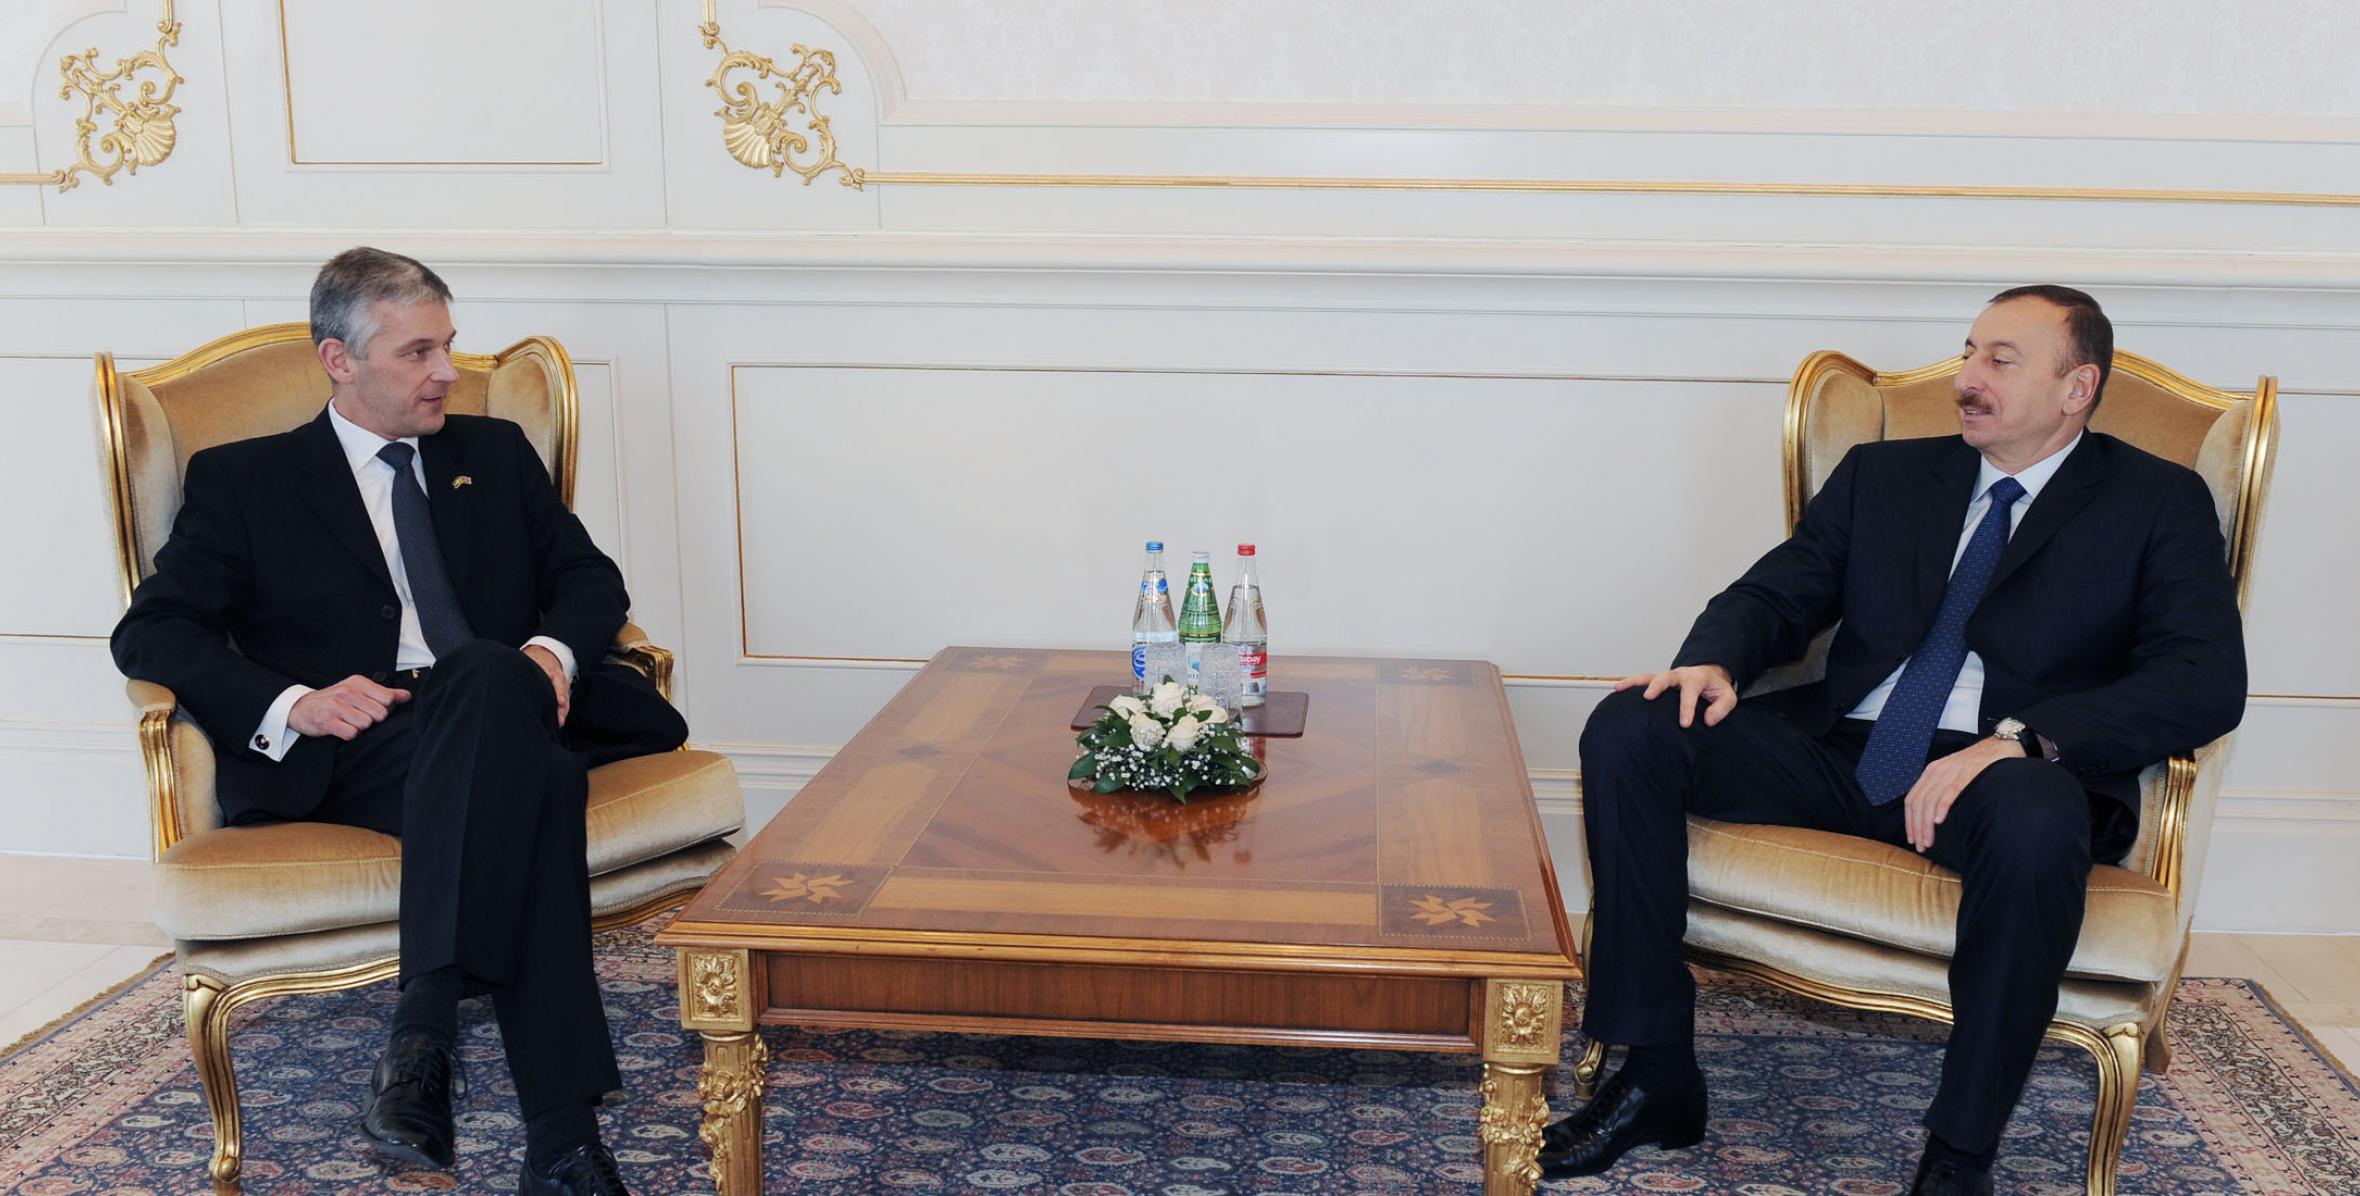 Ilham Aliyev accepted the credentials of the Ambassador of the Kingdom of Sweden to Azerbaijan, Mr. Mikael Eriksson